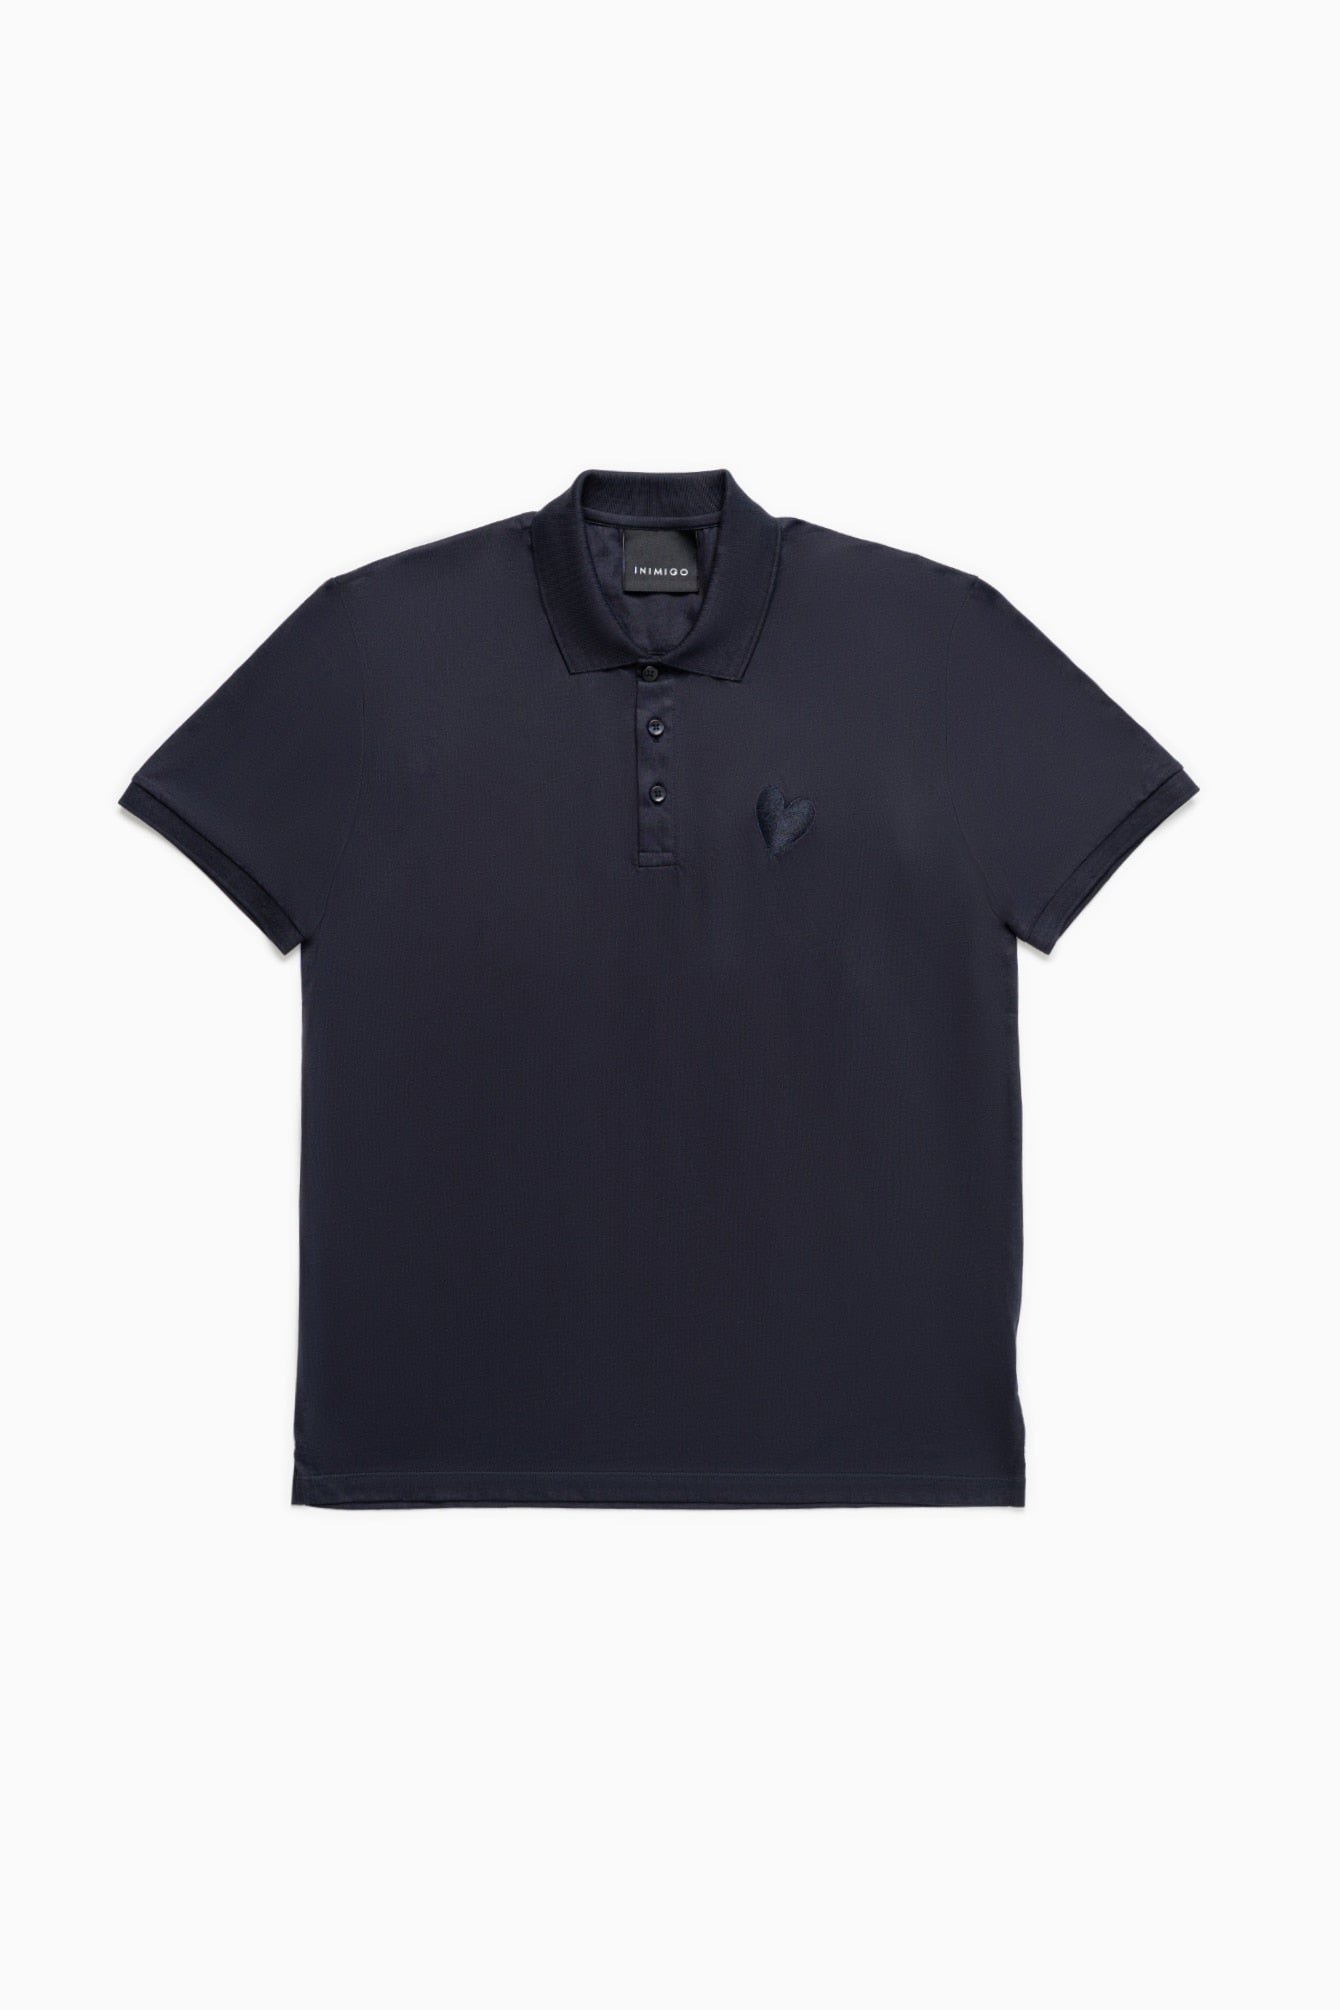 Classic Embroidery Heart Jersey Mid Blue Polo